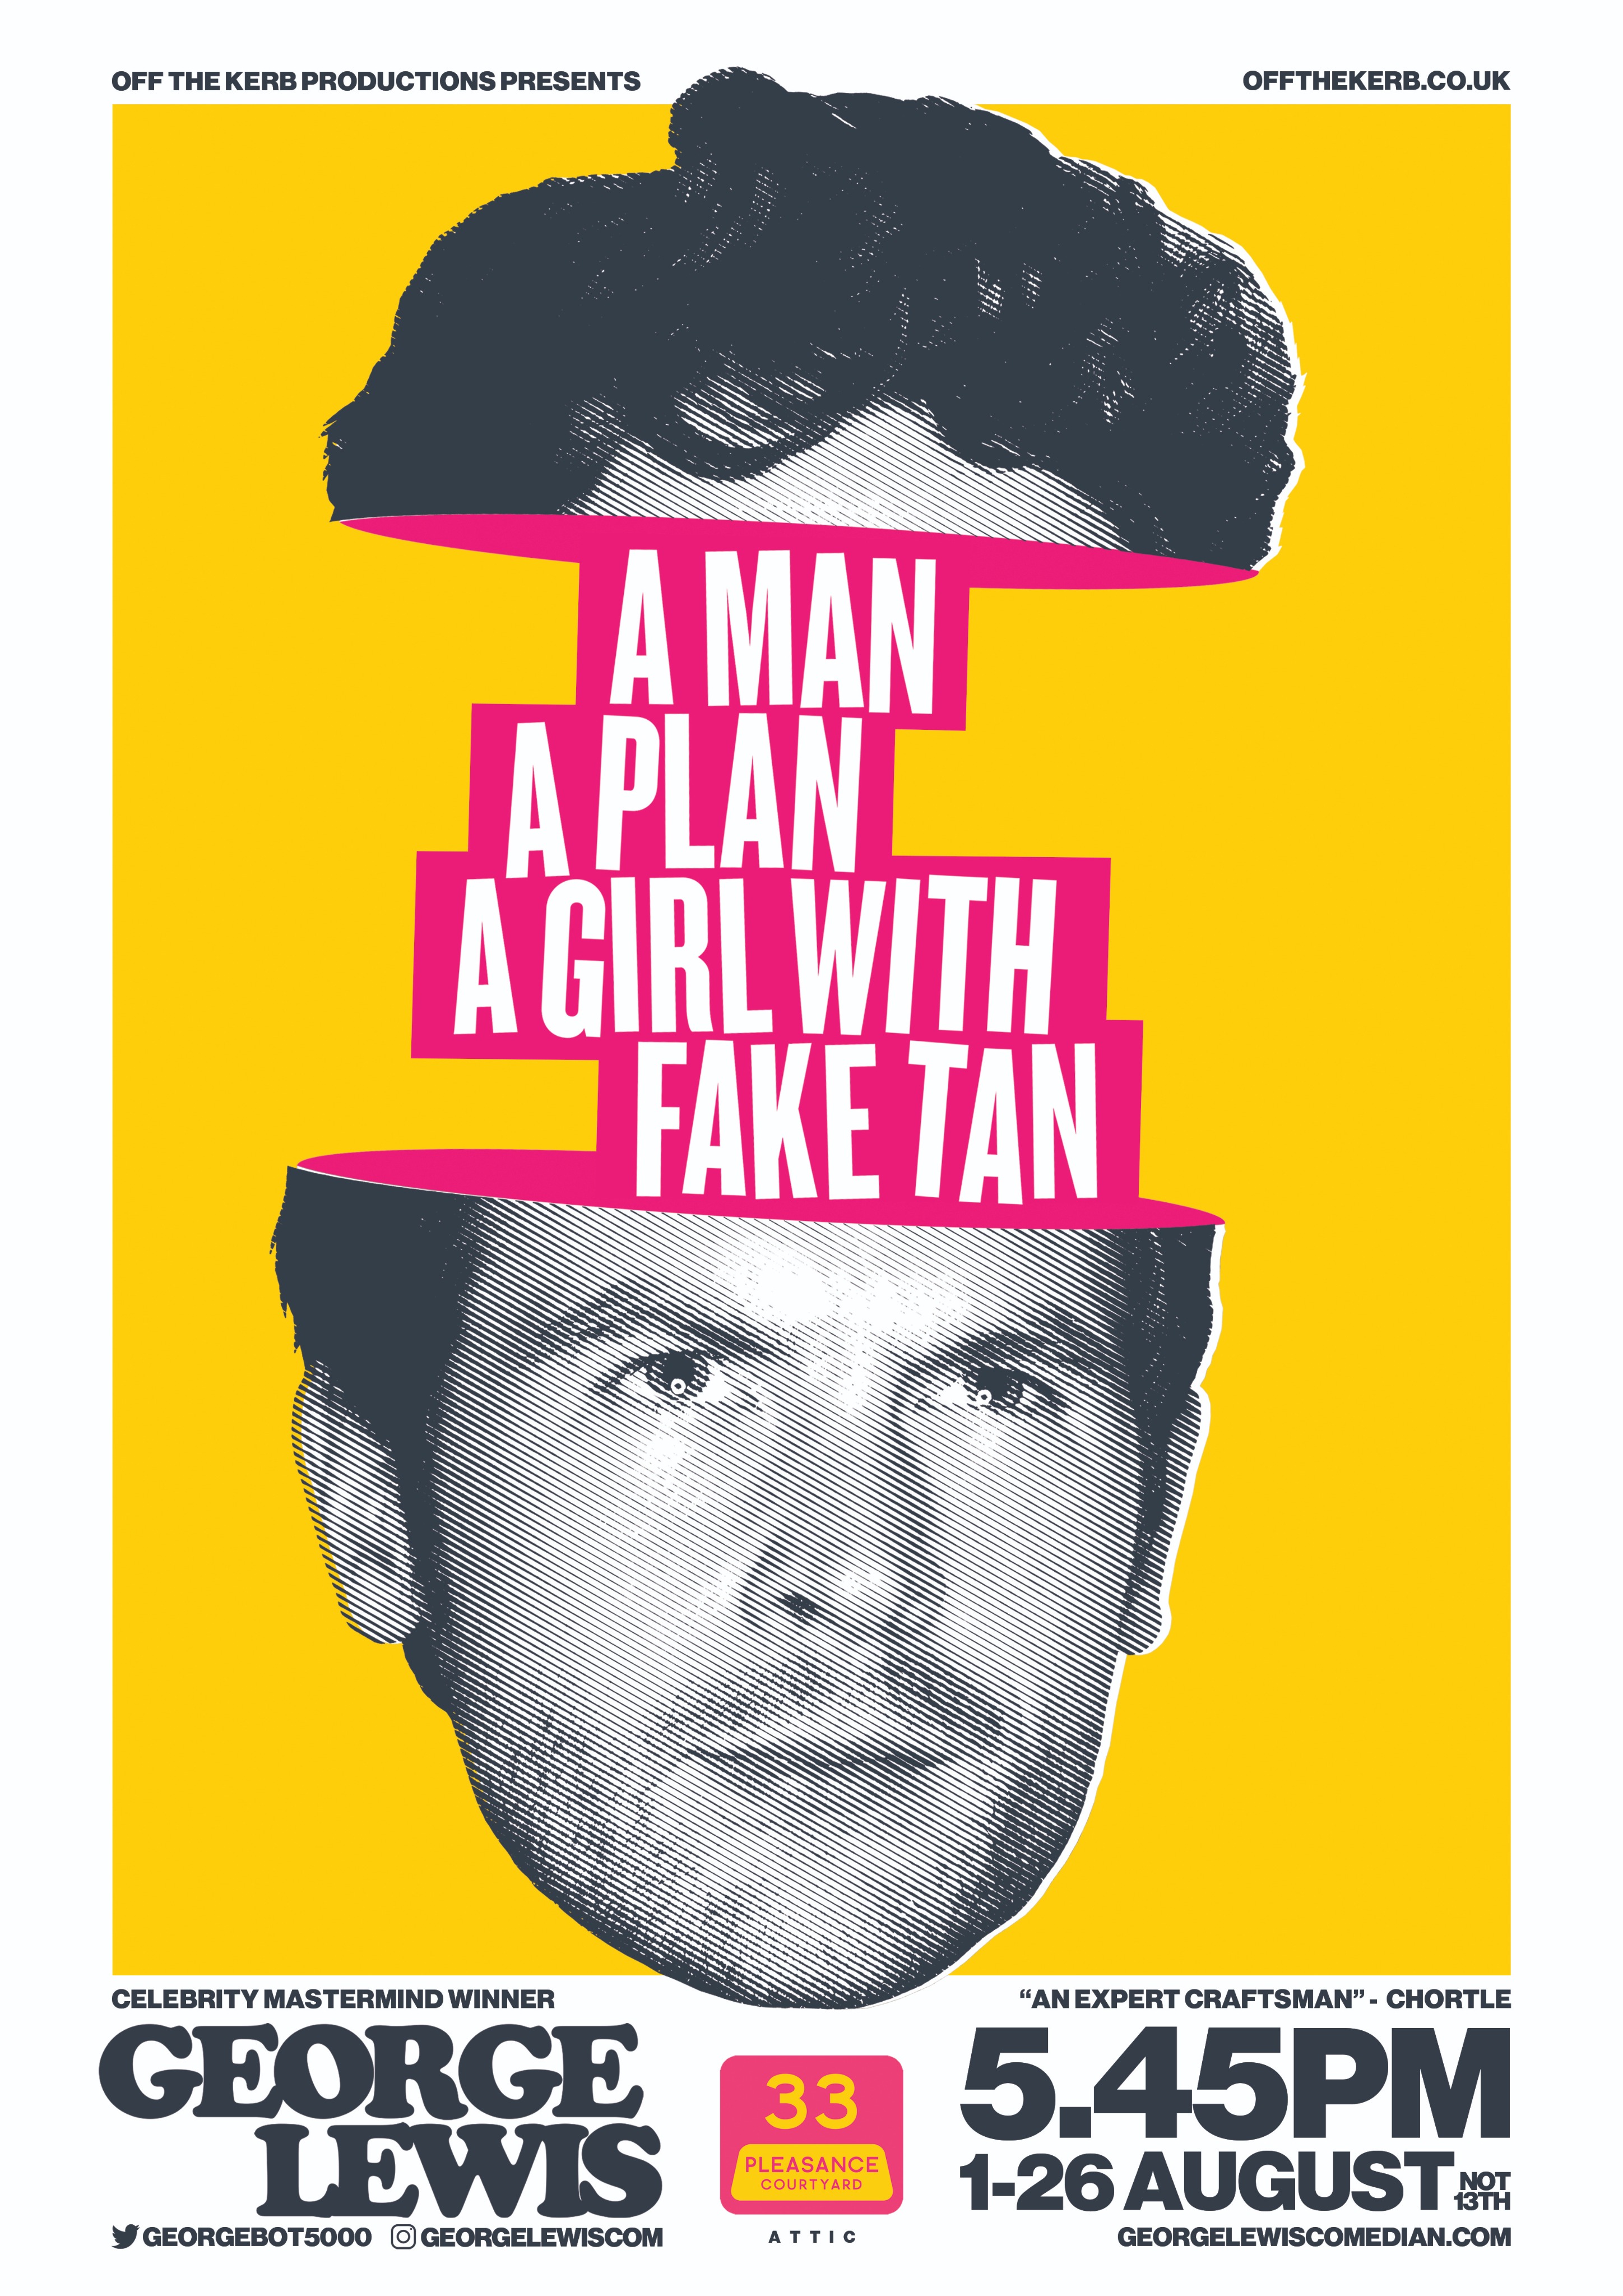 The poster for George Lewis: A Man, A Plan, A Girl With Fake Tan